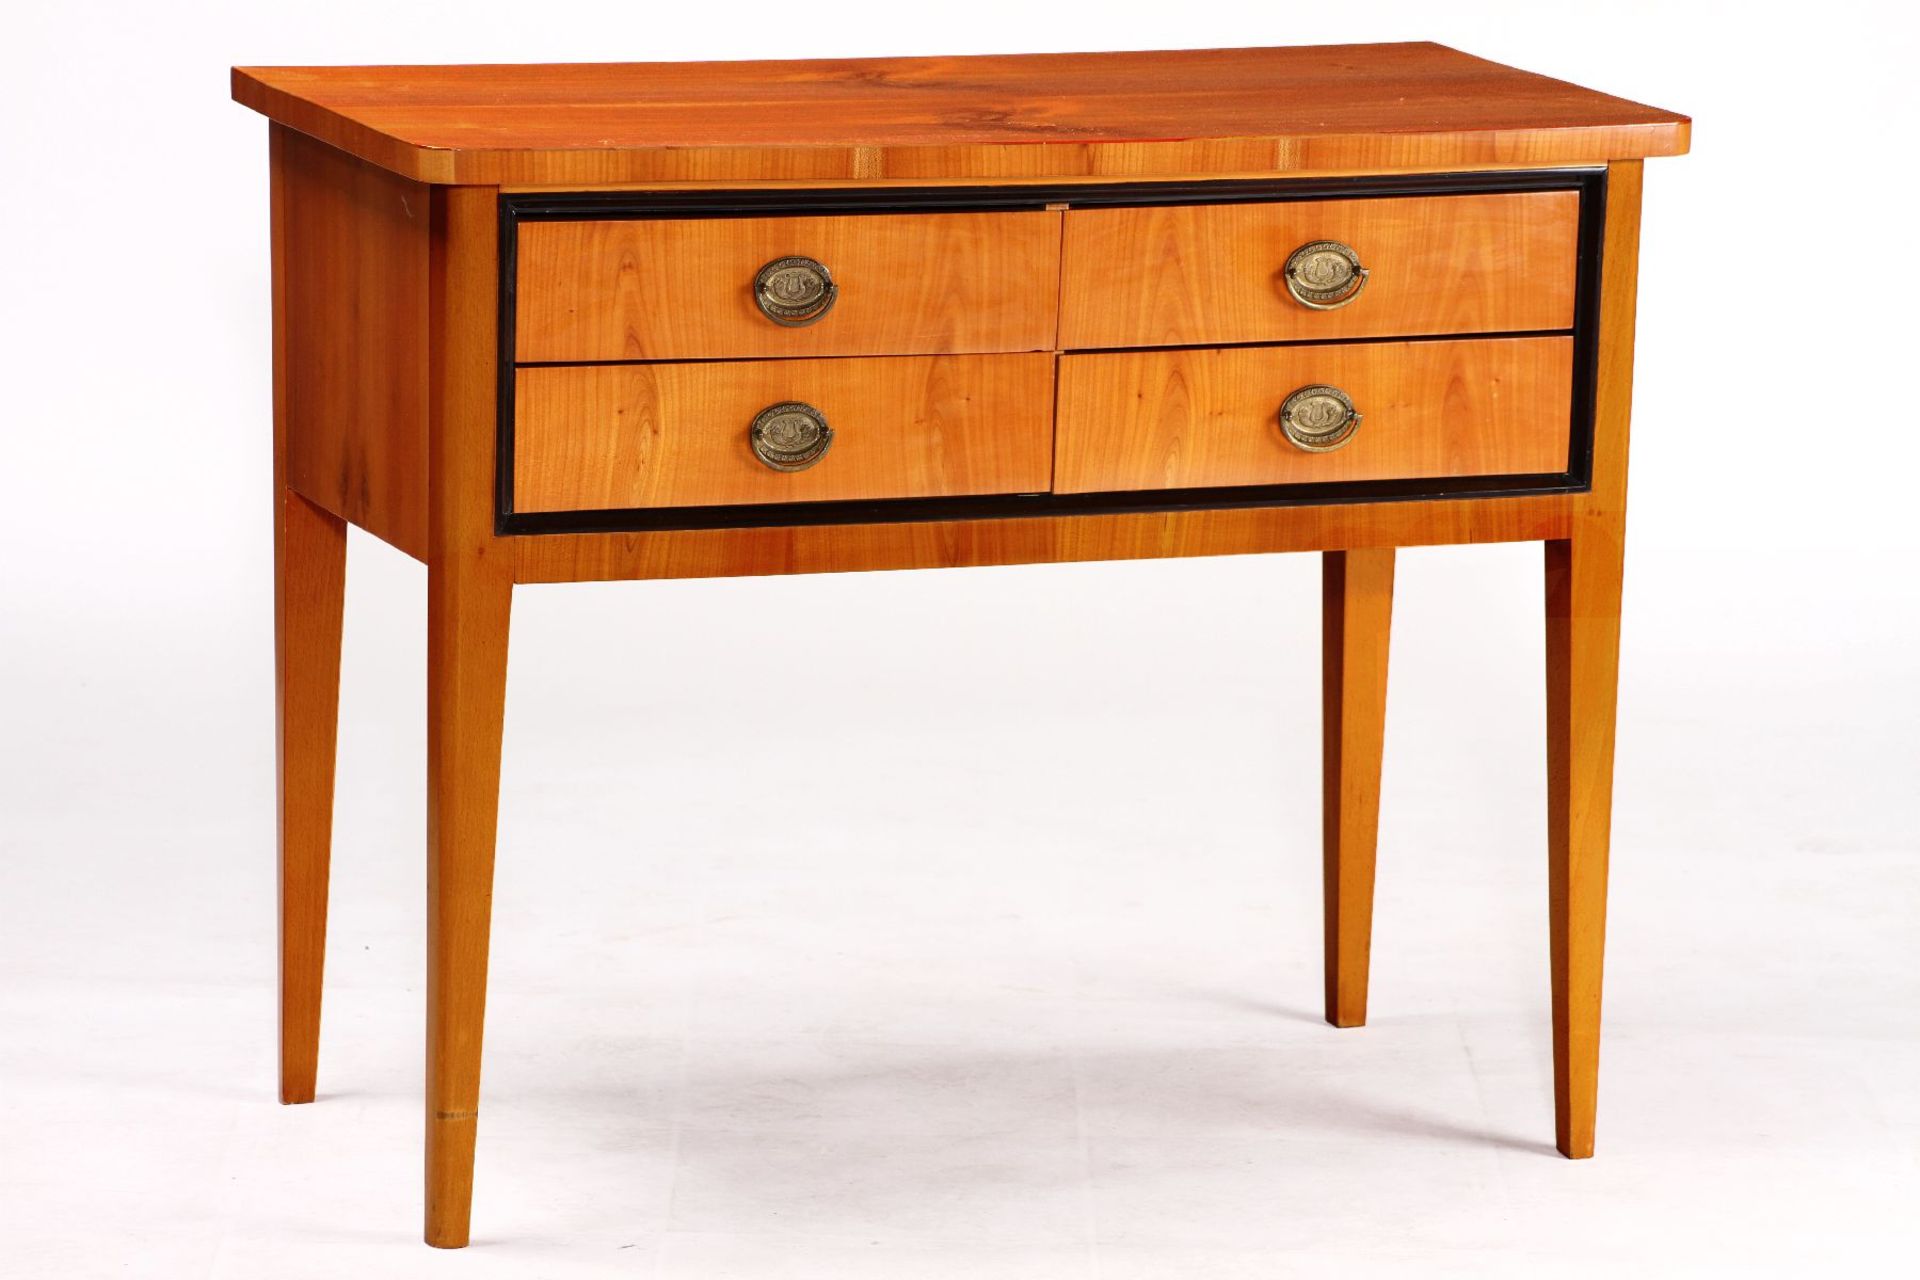 Console, in Biedermeier style, corpus cherry and Solid beech, cherry veneer partly